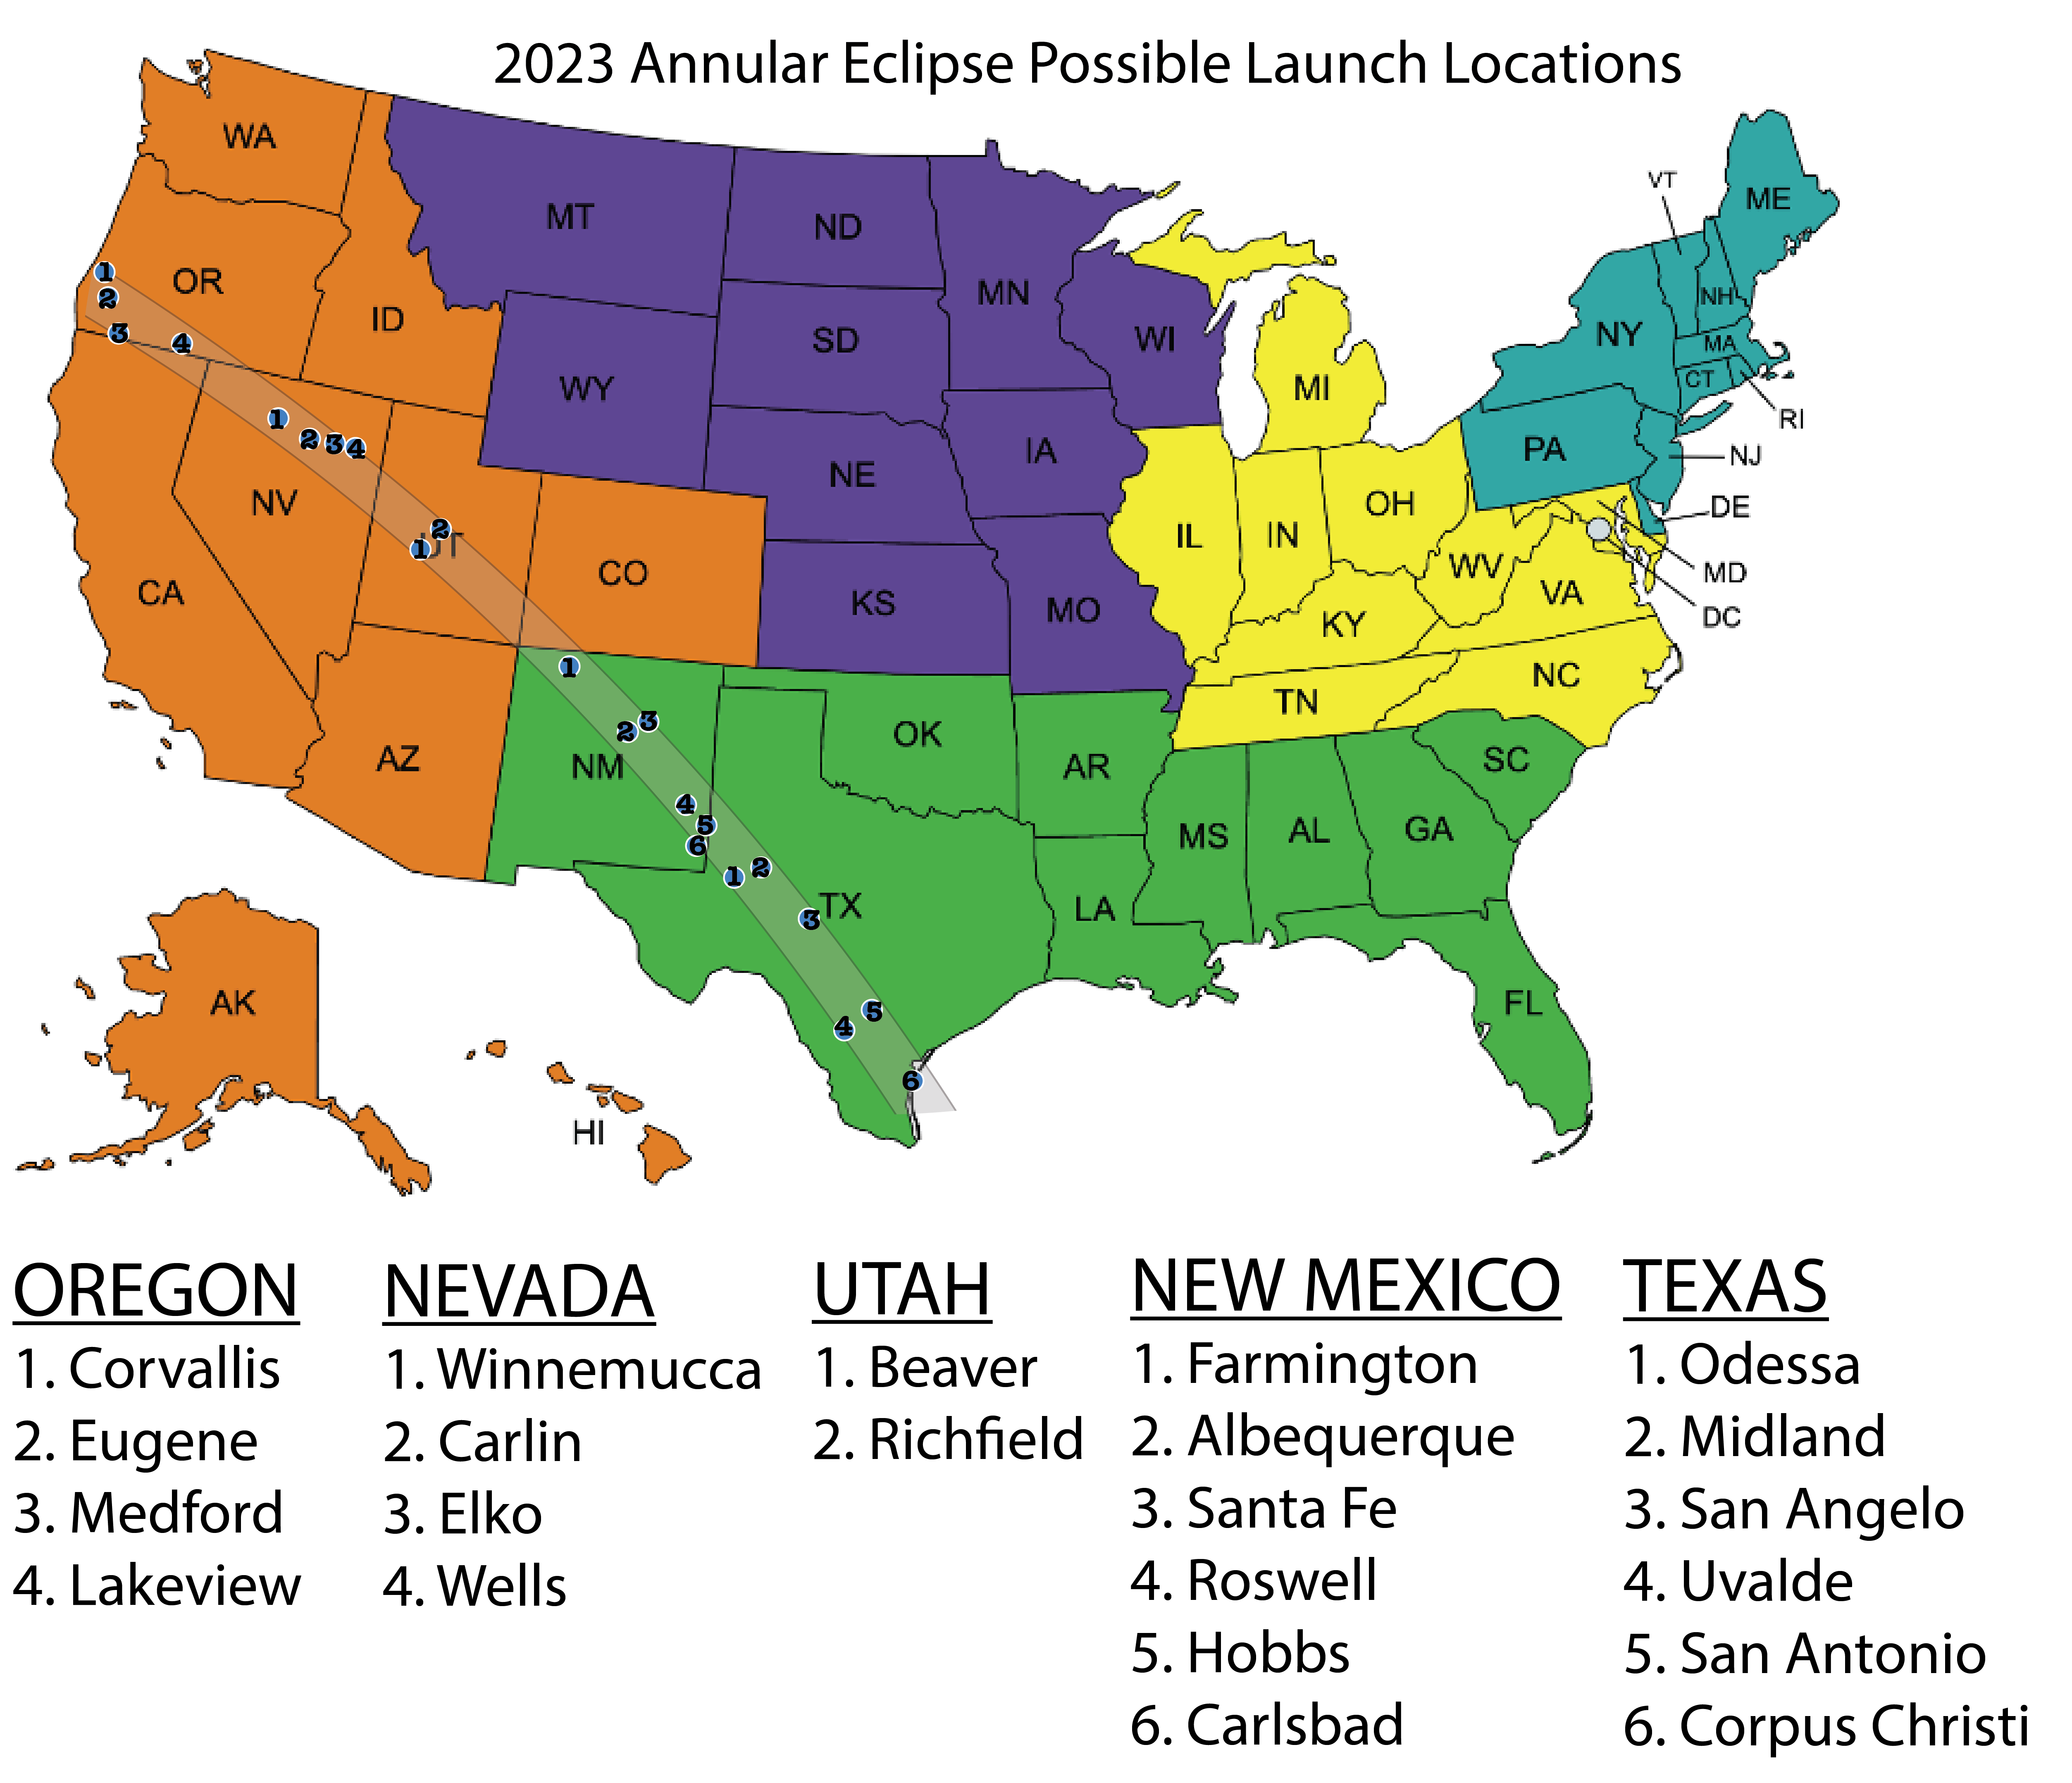 Major cities within the path of totality for the 2023 eclipse, overlaid onto map of the NEBP pod regions. Cities listed are: Corvallis, OR; Eugene, OR; Medford, OR; Lakeview OR; Winnemucca, NV; Carlin, NV; Elko, NV; Wells, NV; Beaver, UT; Richfield, UT; Farmington, NM; Albuquerque, NM; Santa Fe, NM; Roswell, NM; Hobbs, NM; Carlsbad, NM; Odessa, TX; Midland, TX; San Angelo, TX; Uvalde, TX; San Antonio, TX; and Corpus Christi, TX.